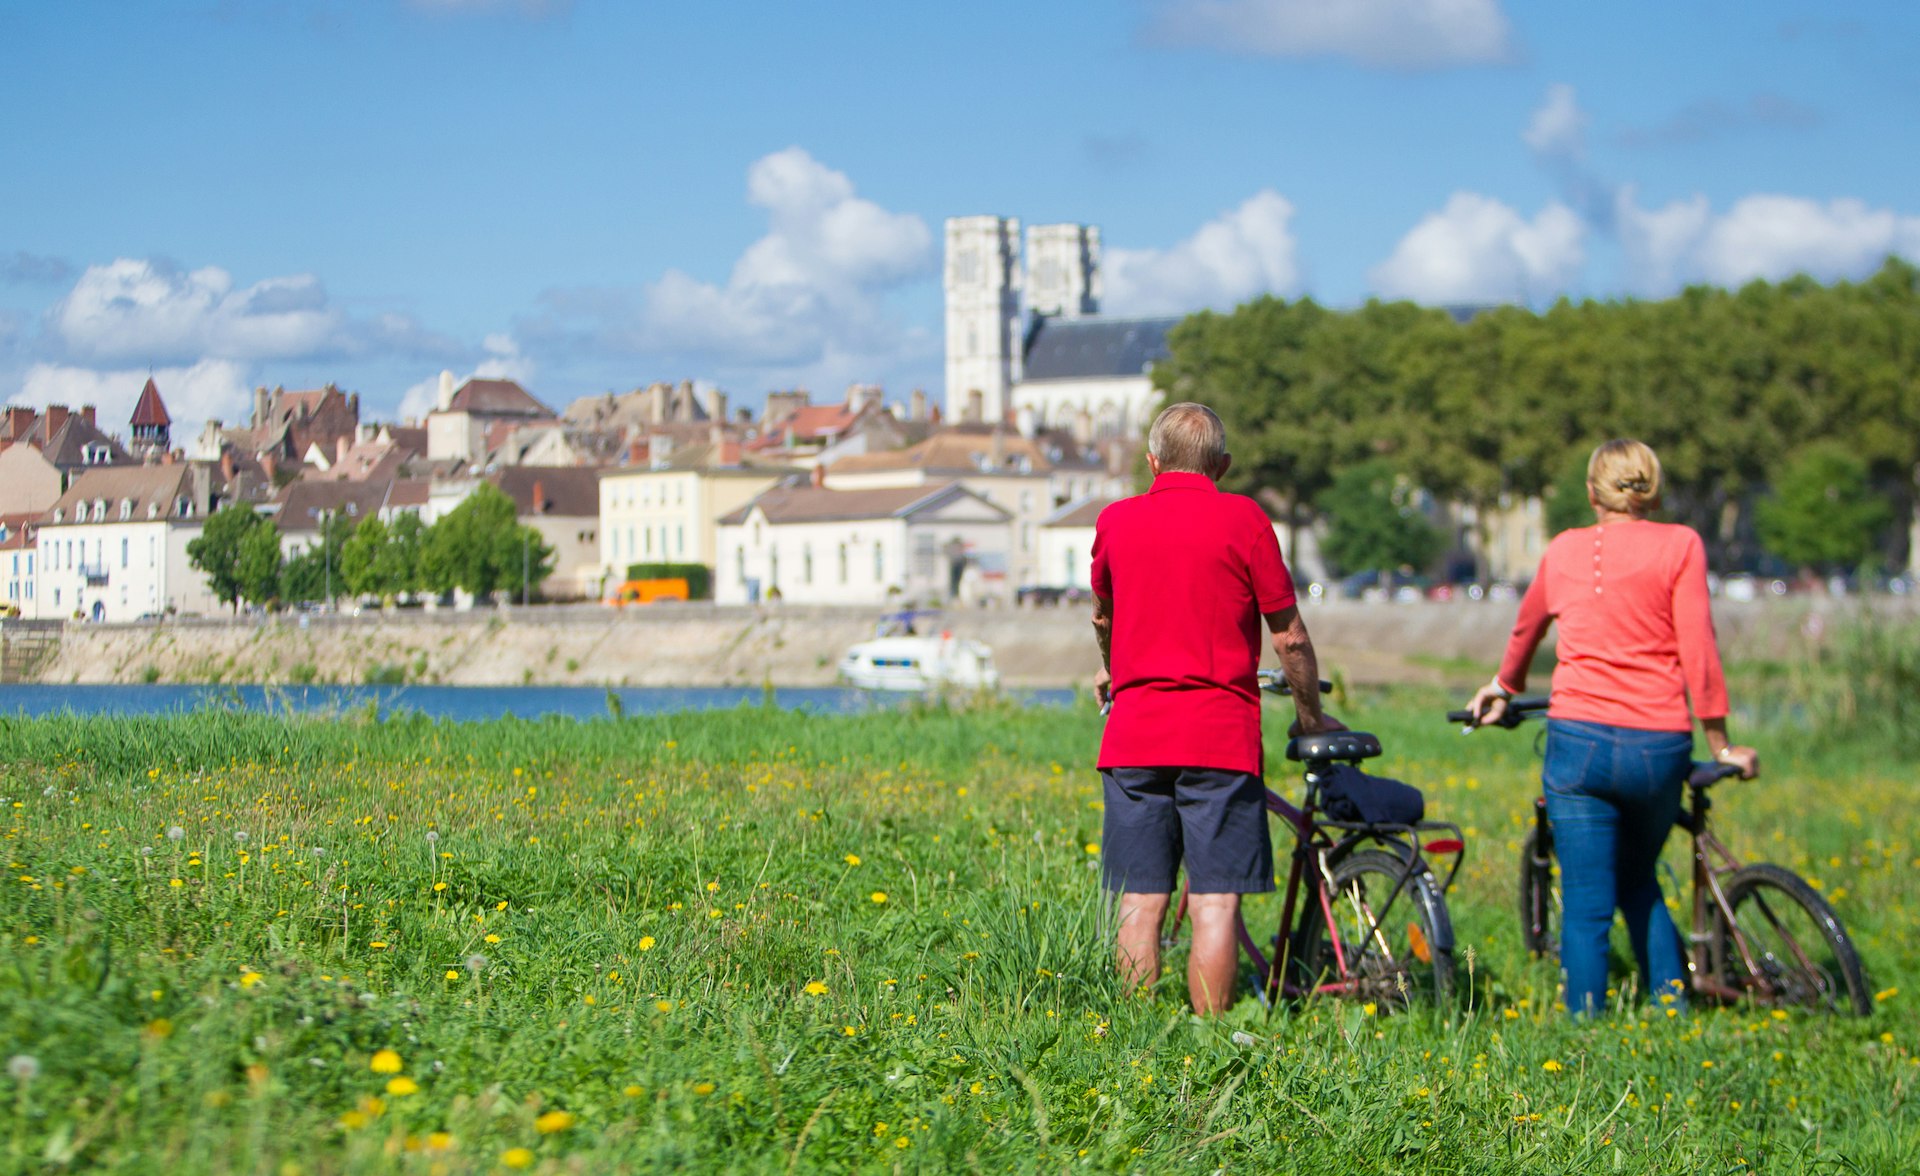 Rear view of an older man and woman with bicycles stood in a grassy field against a blue sky looking across a river at the buildings of Chalon-Sur-Saône in France